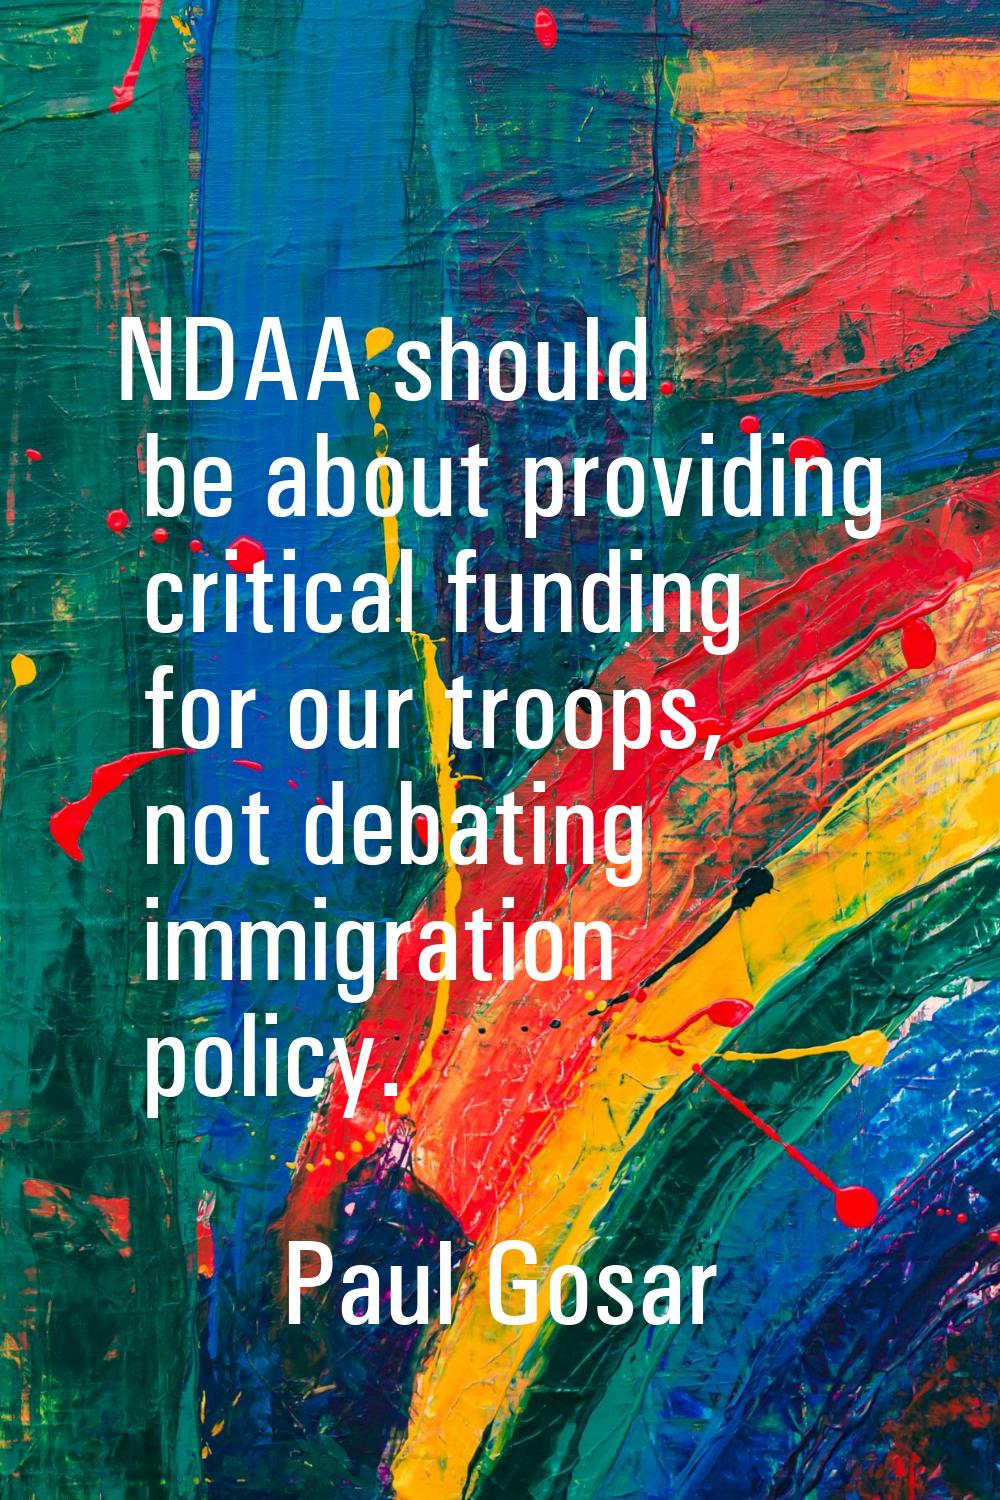 NDAA should be about providing critical funding for our troops, not debating immigration policy.